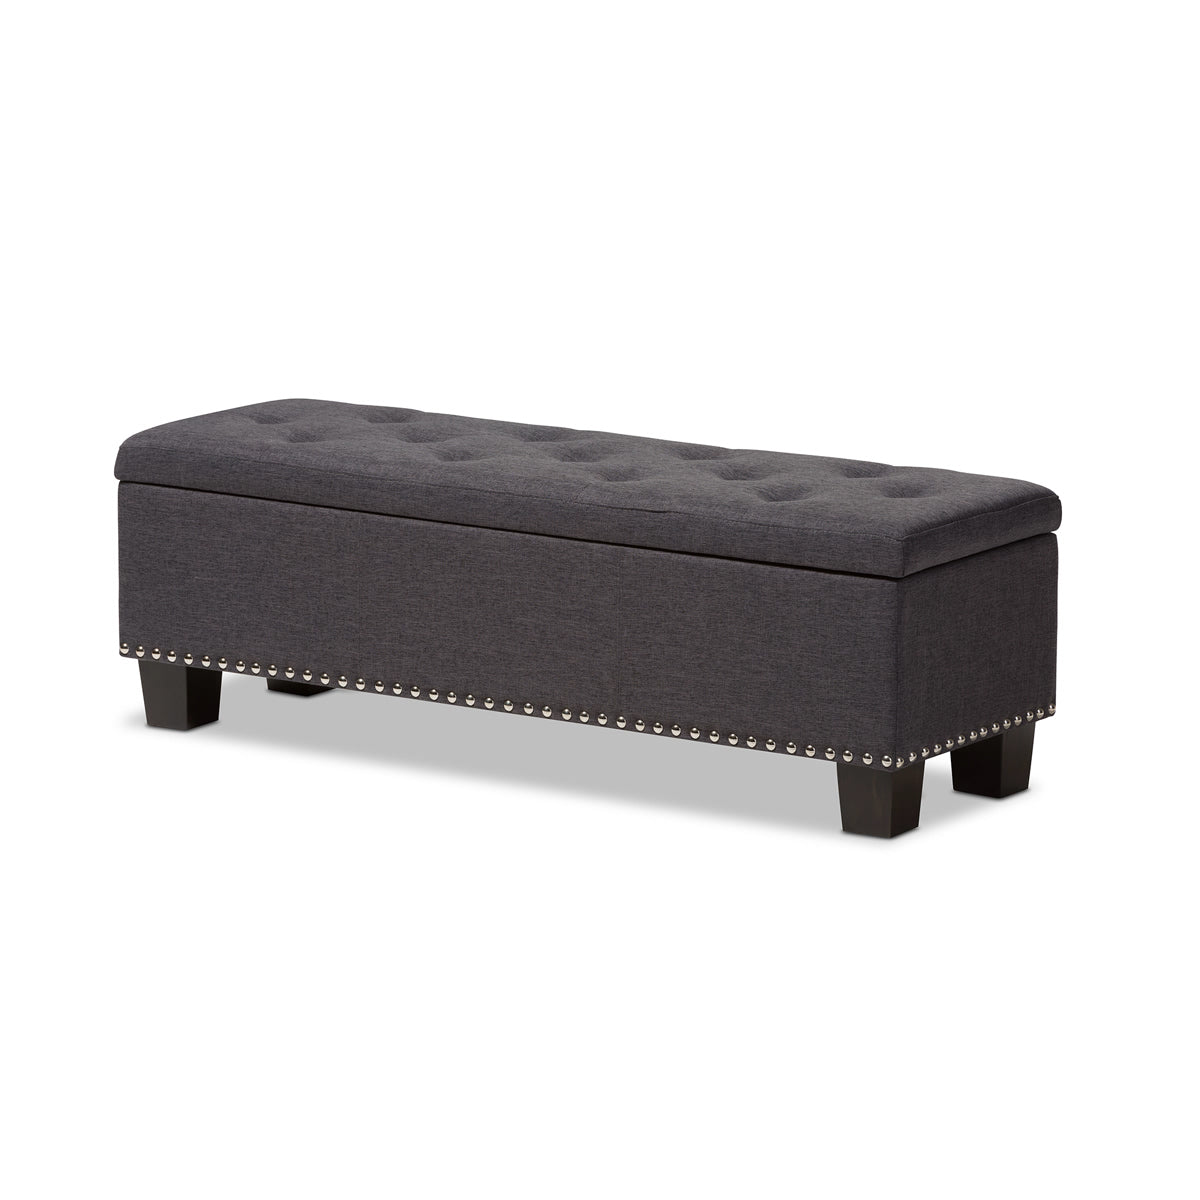 Baxton Studio Hannah Modern and Contemporary Dark Grey Fabric Upholstered Button-Tufting Storage Ottoman Bench Baxton Studio-benches-Minimal And Modern - 2